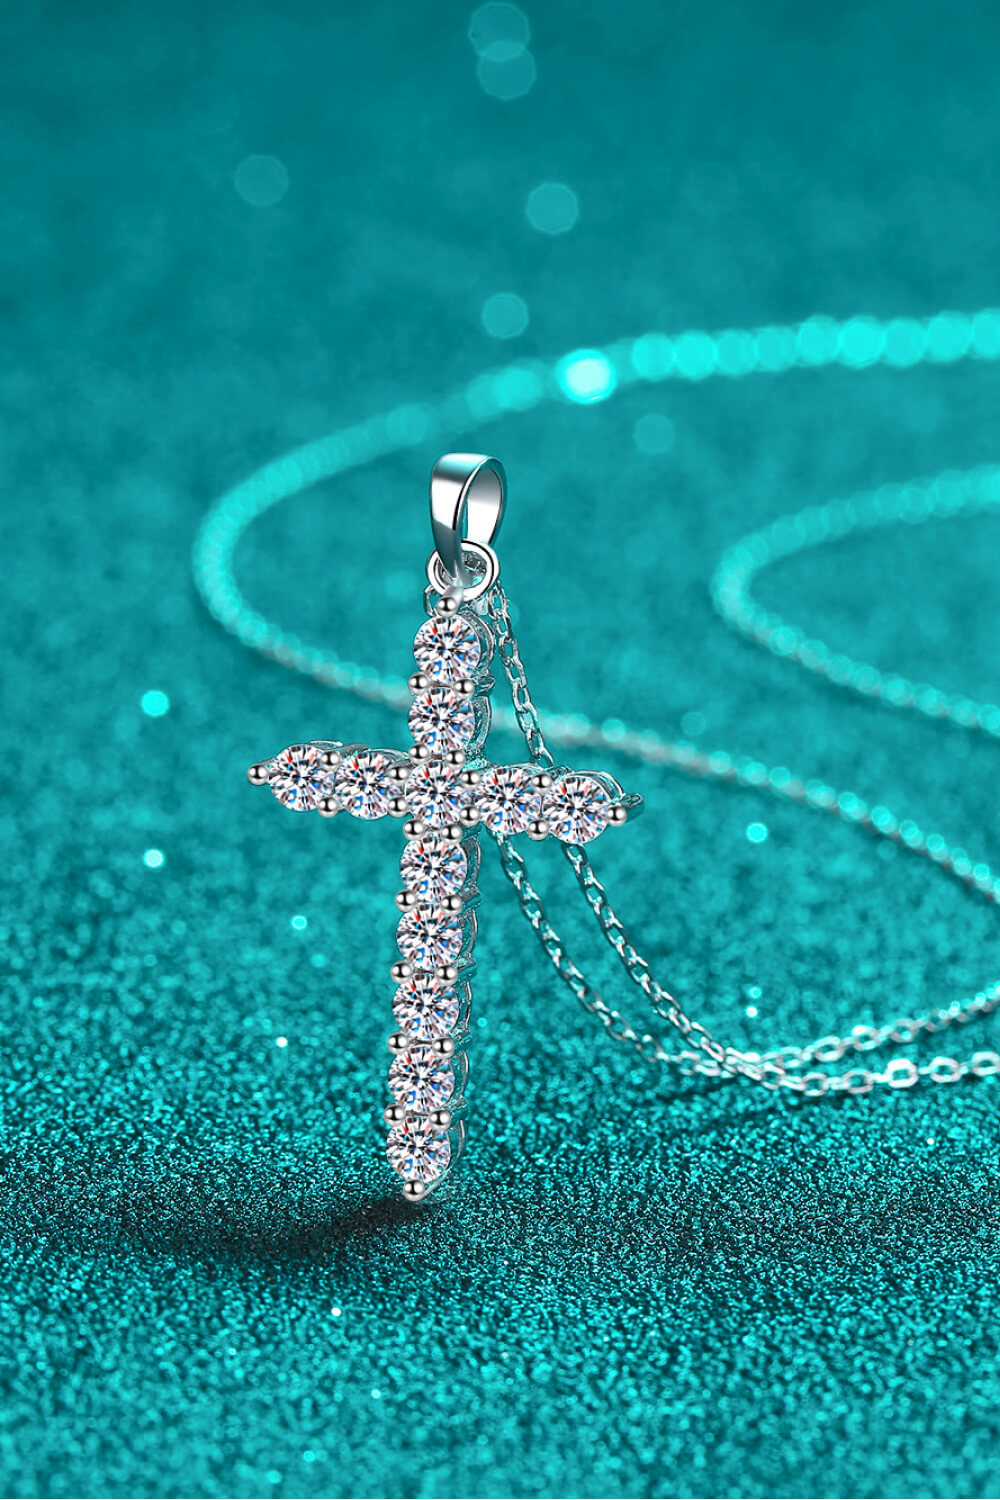 Cross Necklace-925 Sterling Silver, Moissanite